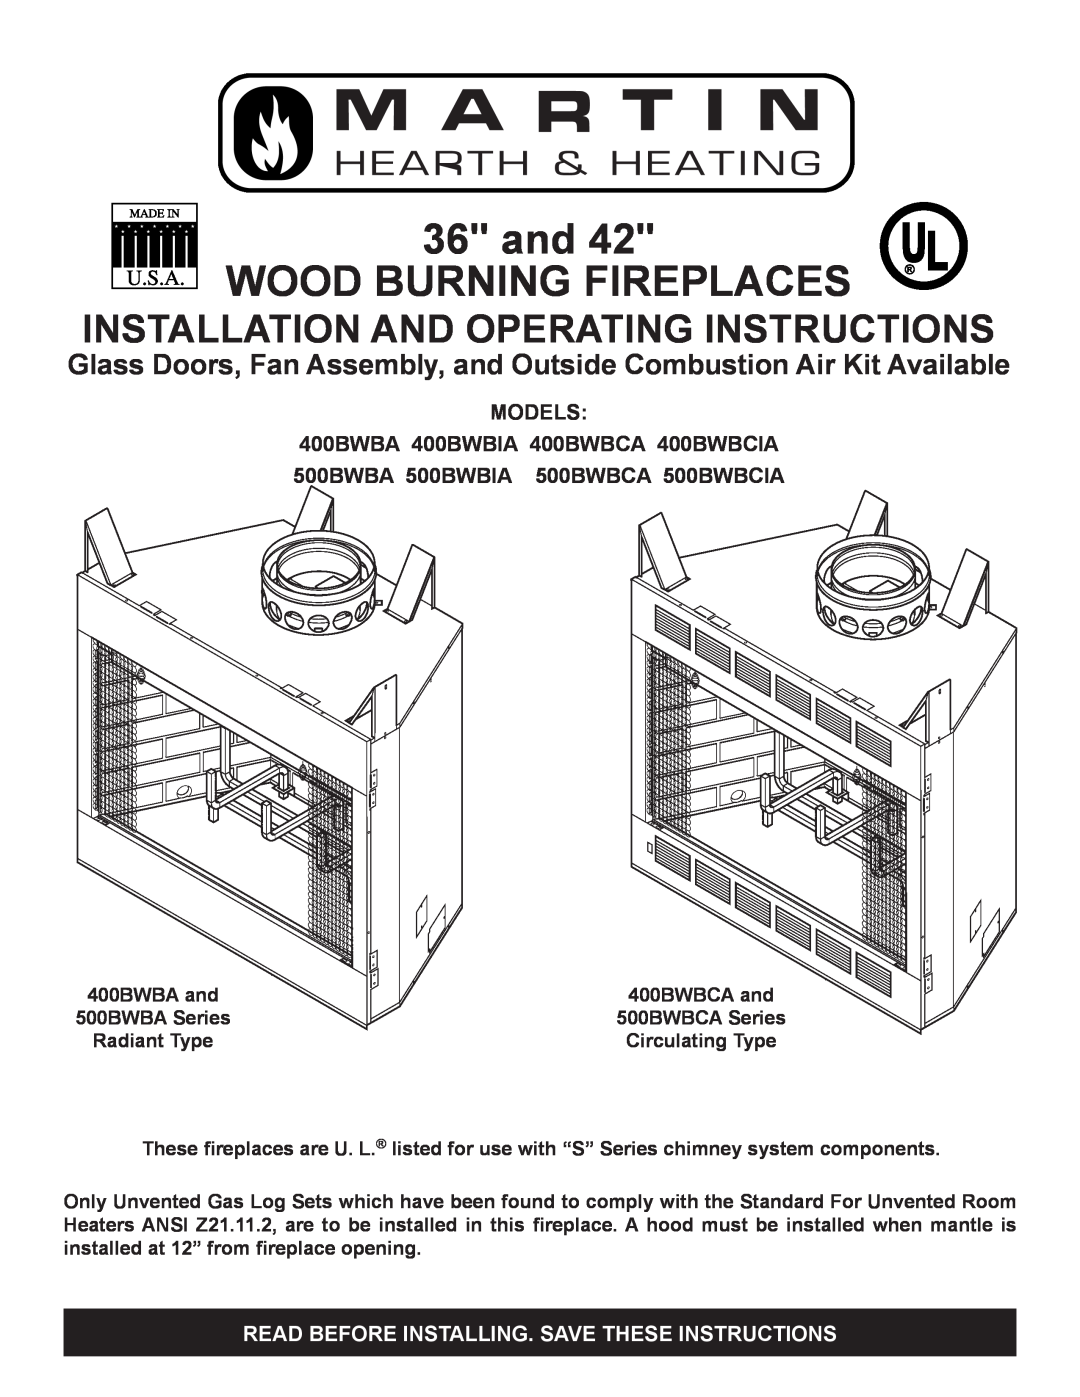 Martin Fireplaces 400BWBCIA operating instructions and WOOD BURNING FIREPLACES, Installation And Operating Instructions 